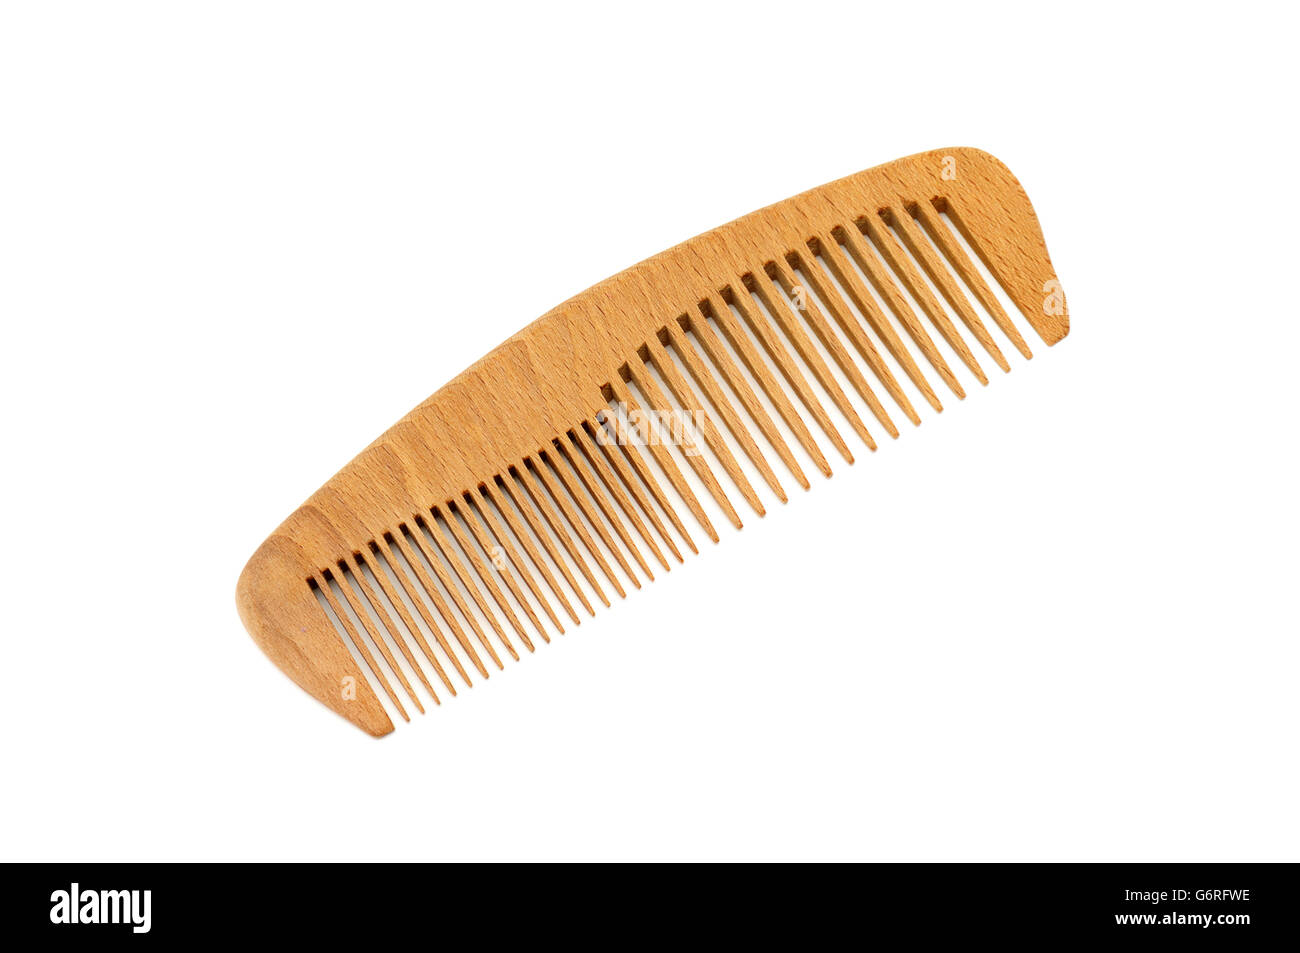 comb for hair isolated on a white background Stock Photo